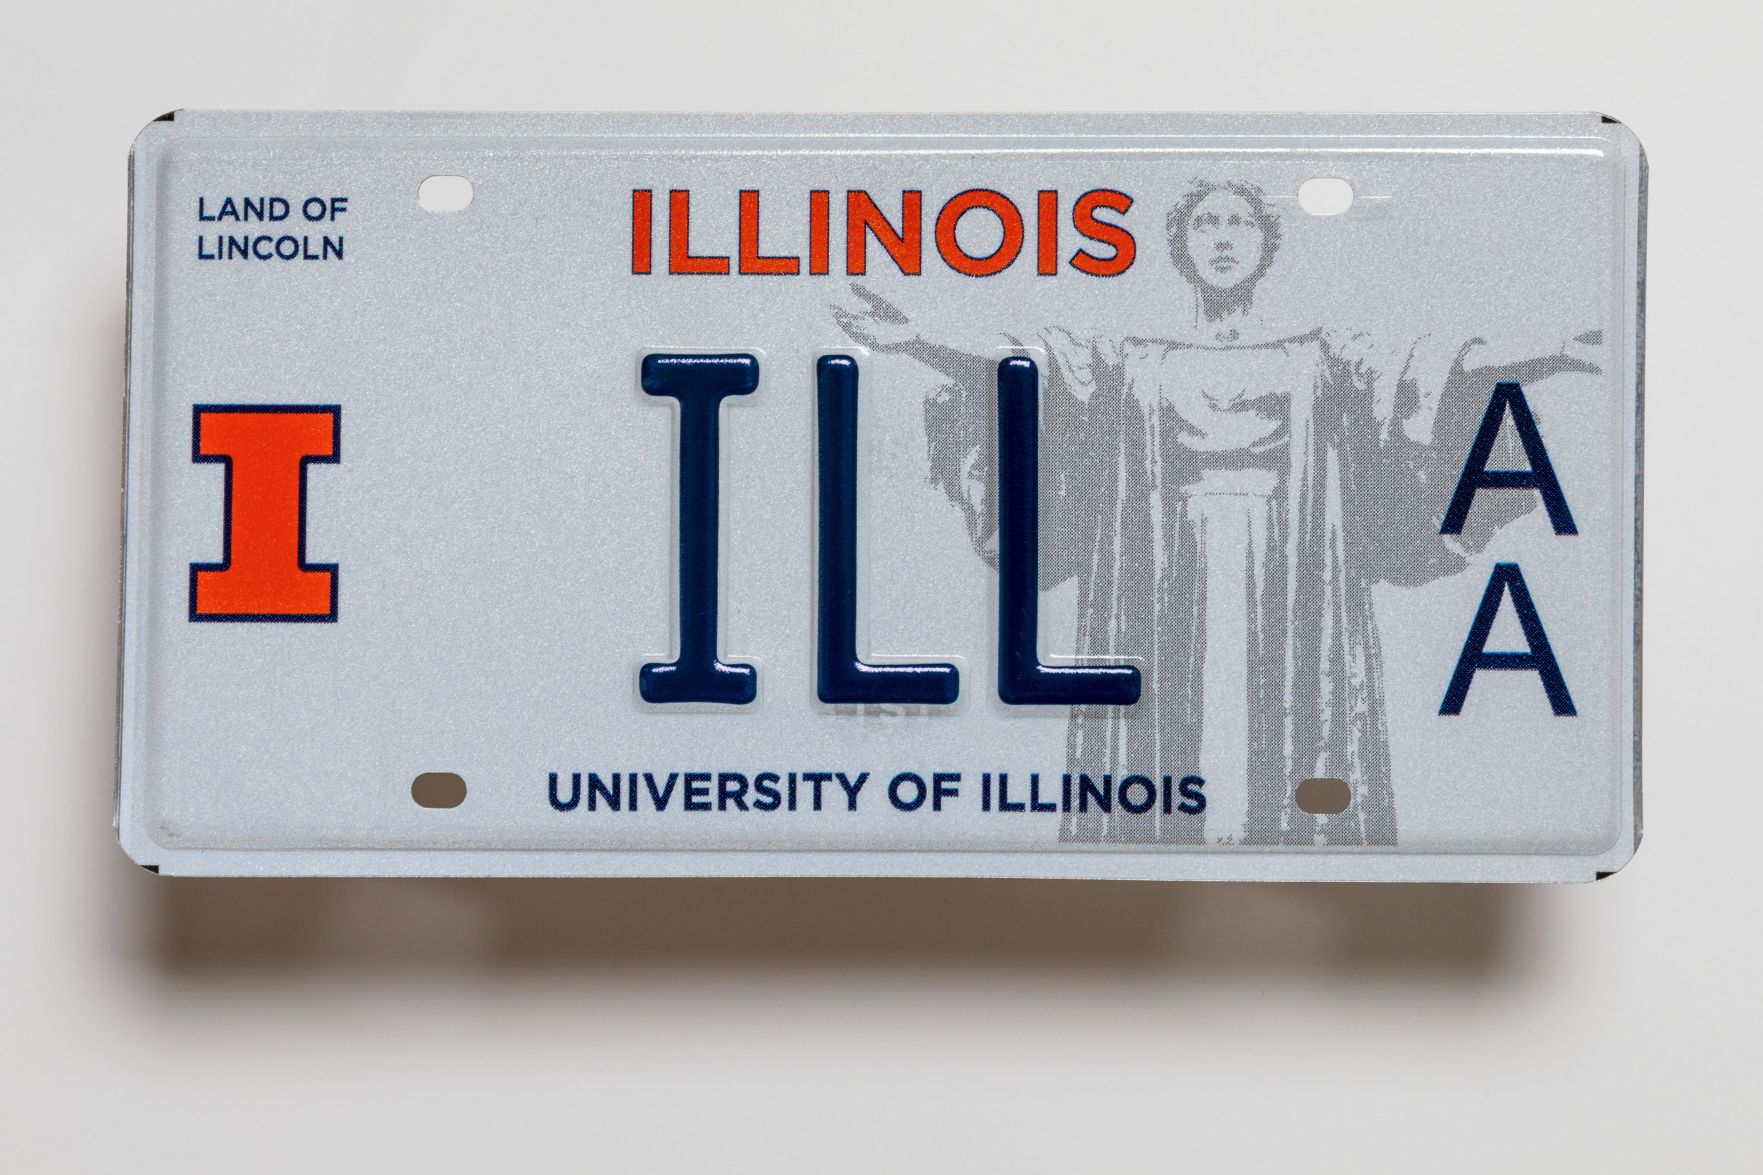 Hail to Alma Mater on new campus license plate | News | news